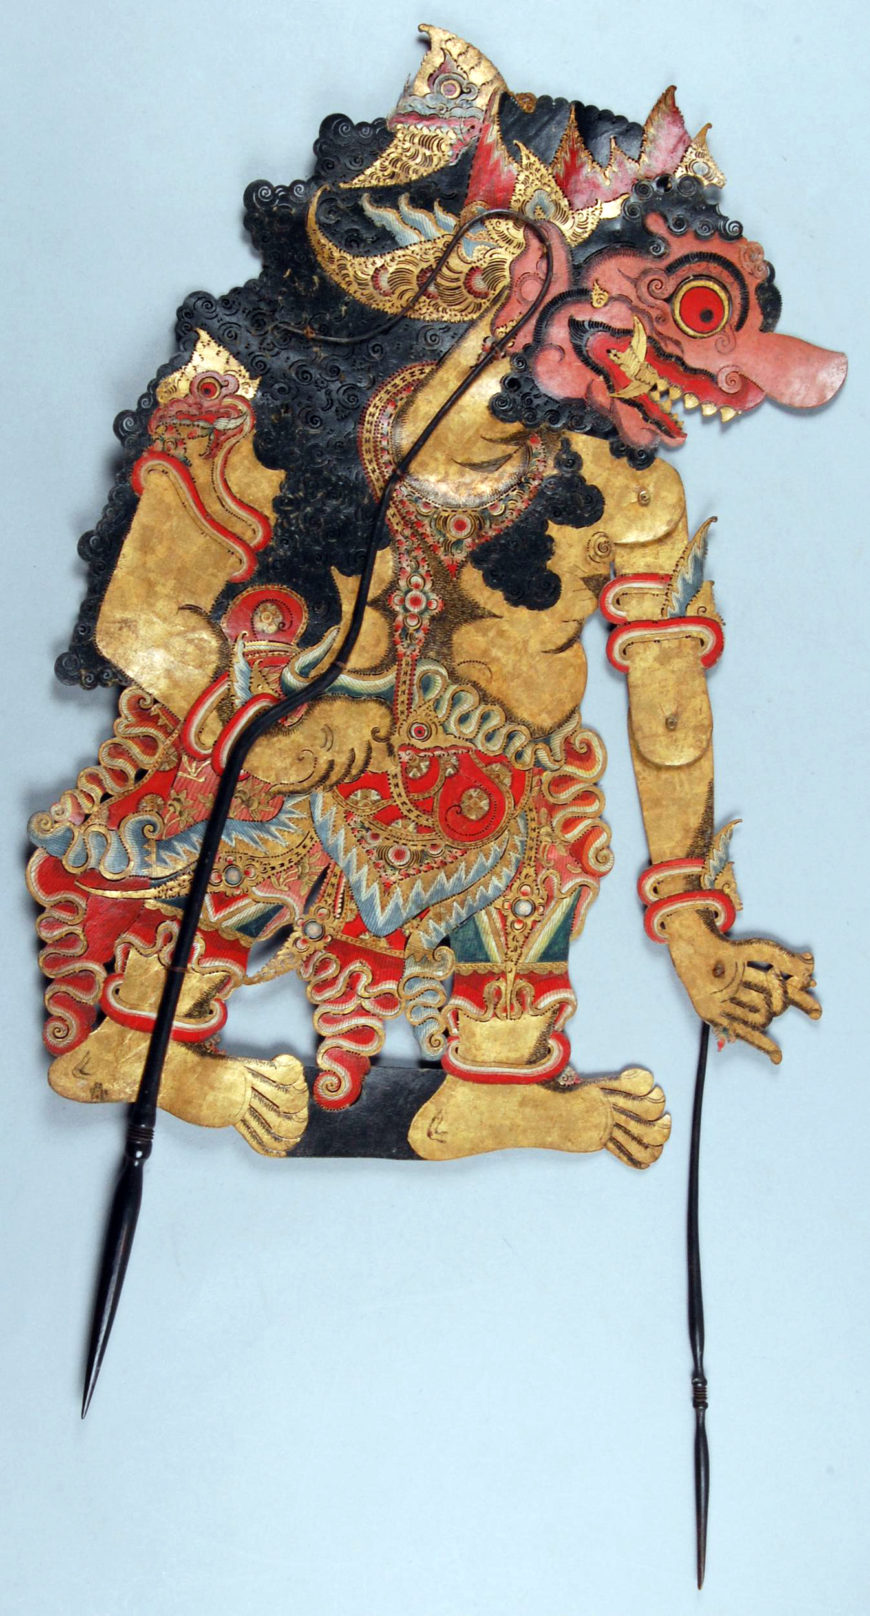 Shadow puppet, Kartasura style, c. 1800–1816, hide, horn and gold leaf, from Java, Indonesia, 90.3 cm high (© Trustees of the British Museum)